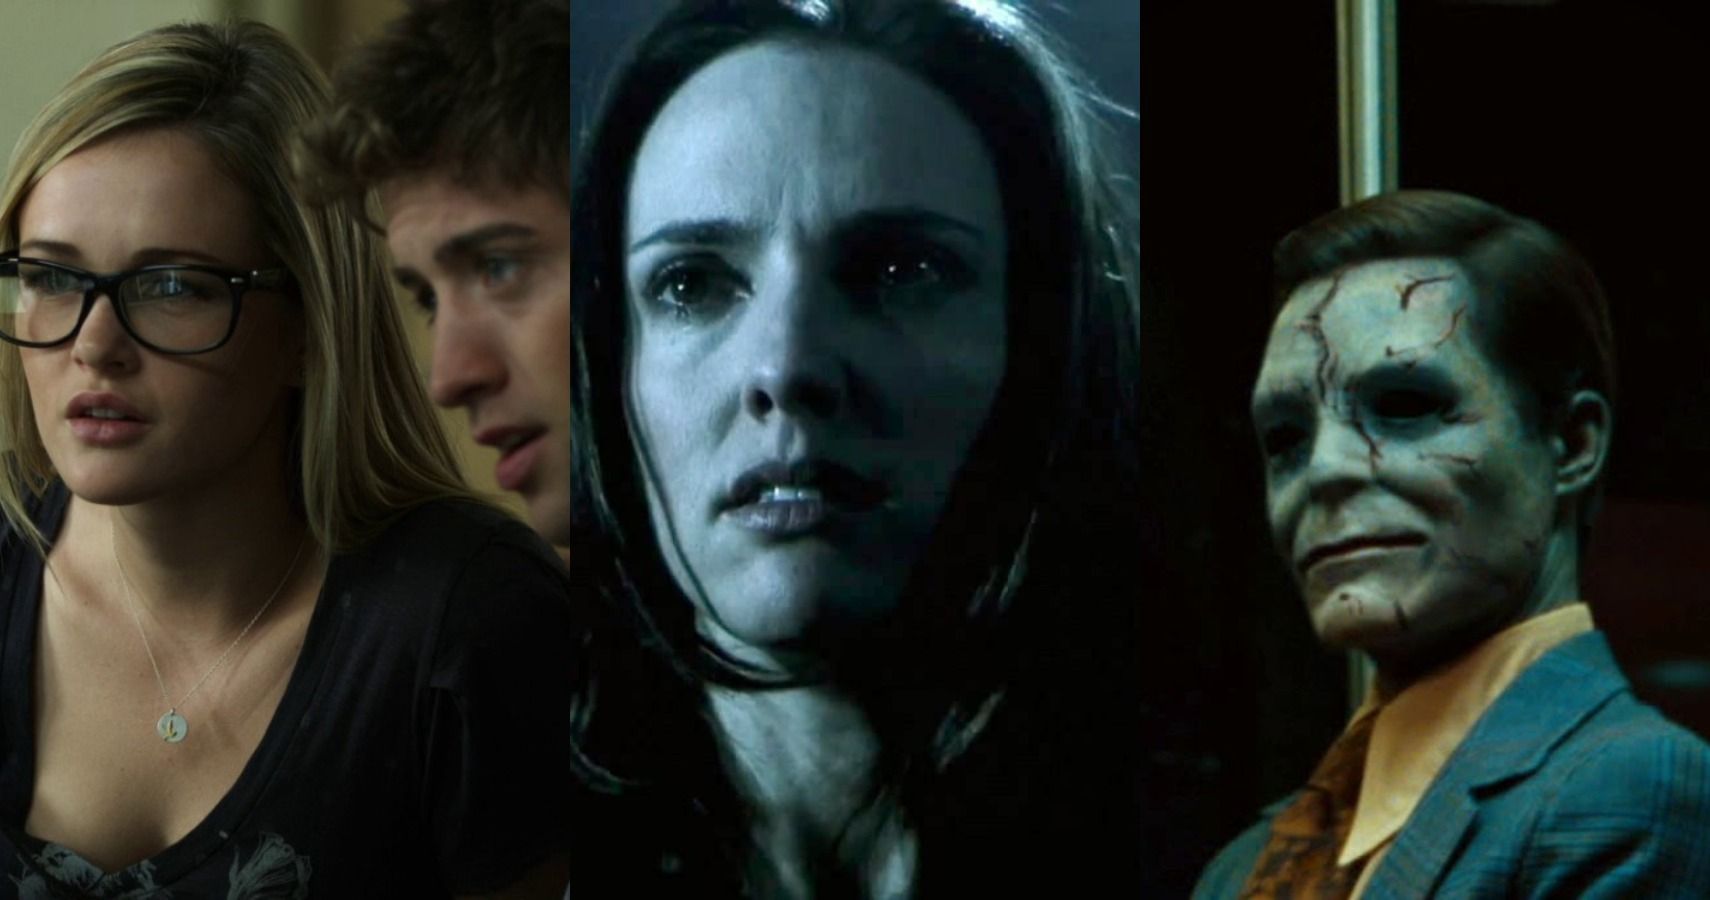 10 Of The Worst 0% Horror Movies On Rotten Tomatoes